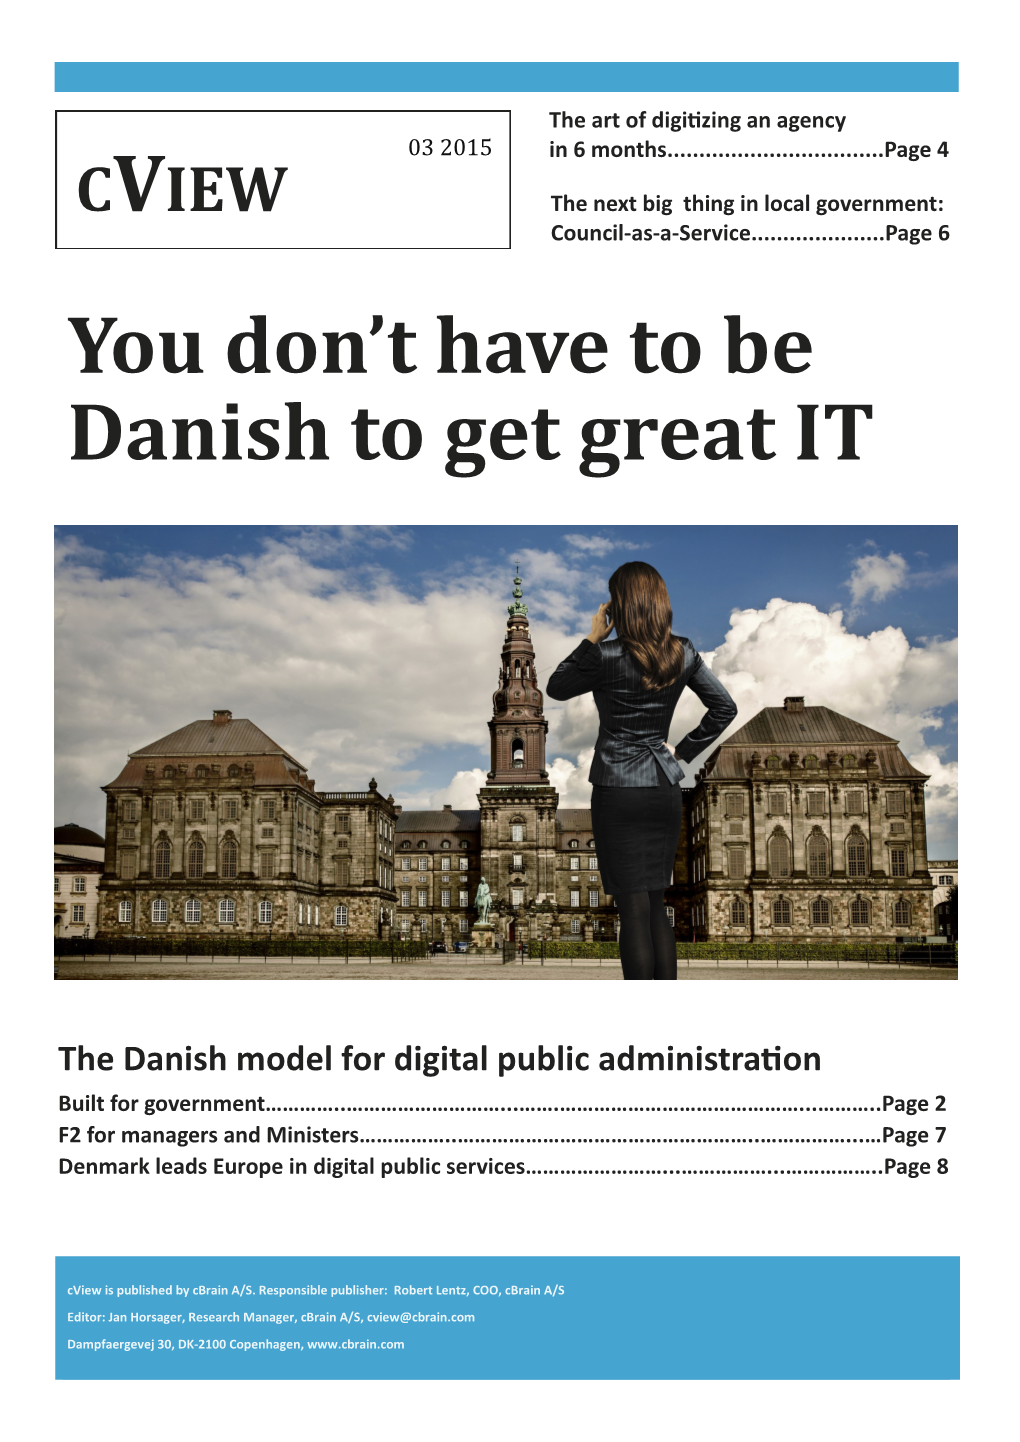 You Don't Have to Be Danish to Get Great IT